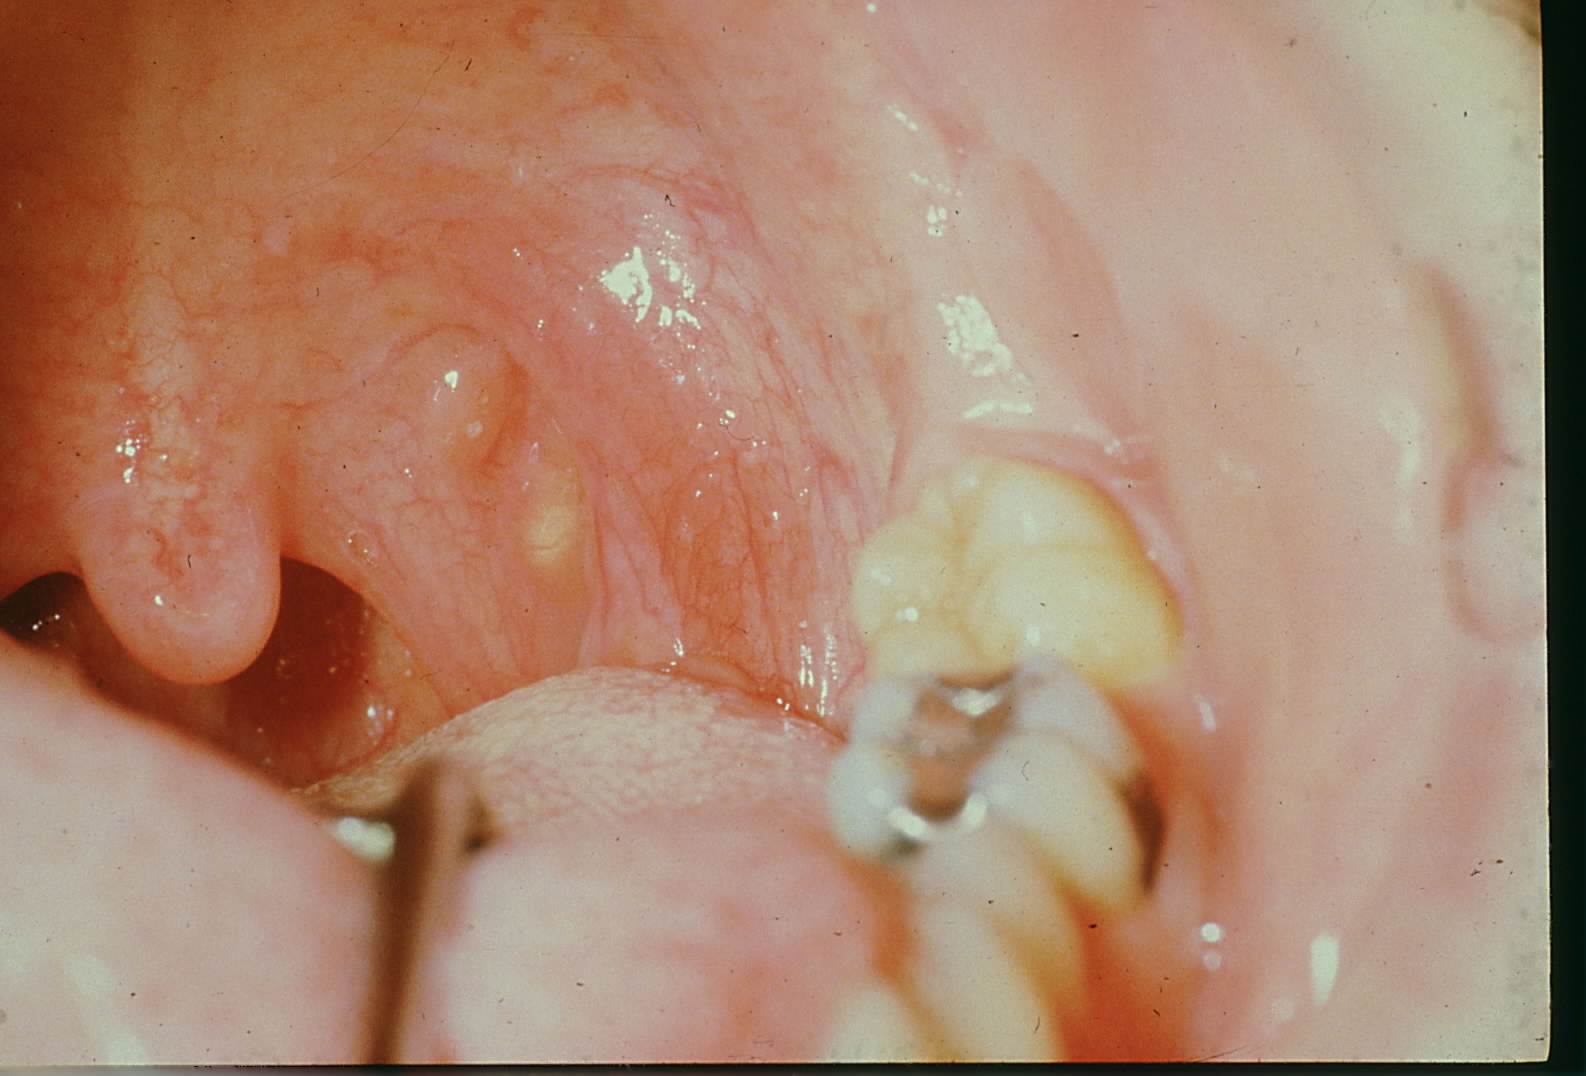 Oral lymph-epithelial cyst and aggregate on posterior pharyngeal pillar